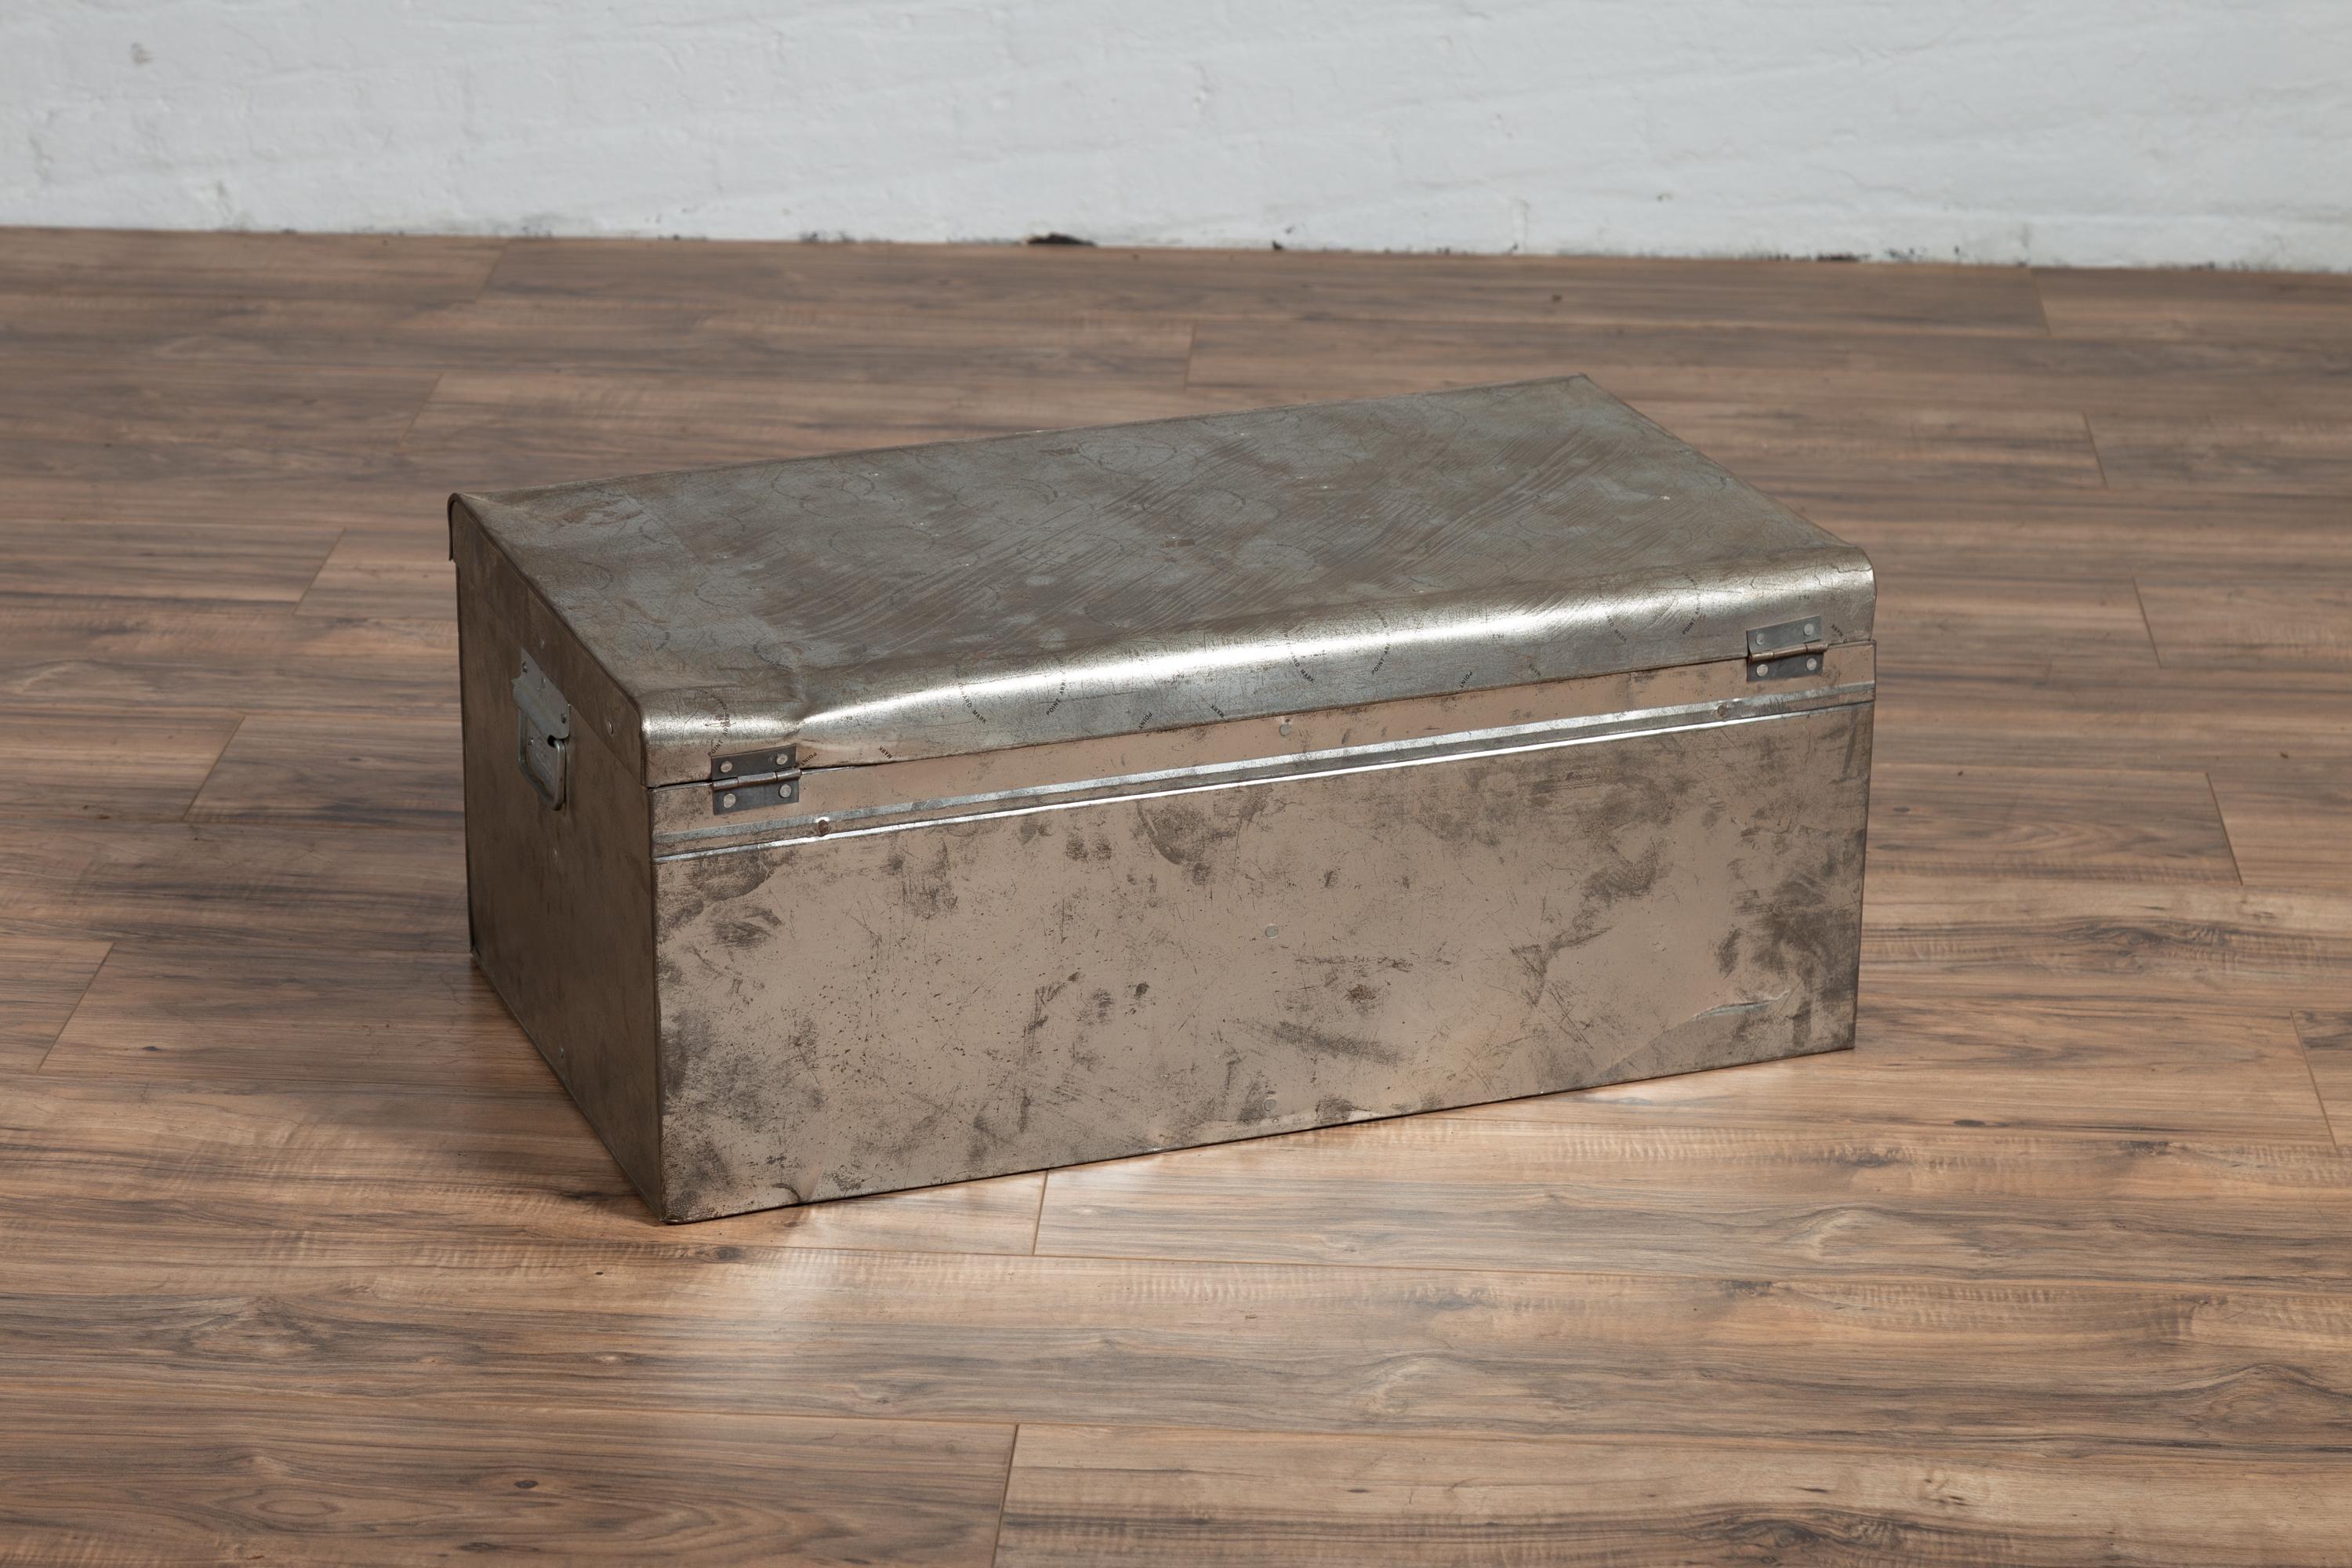 Indian Vintage Metal Tool Box with Distressed Silver Colored Finish and Handles 5